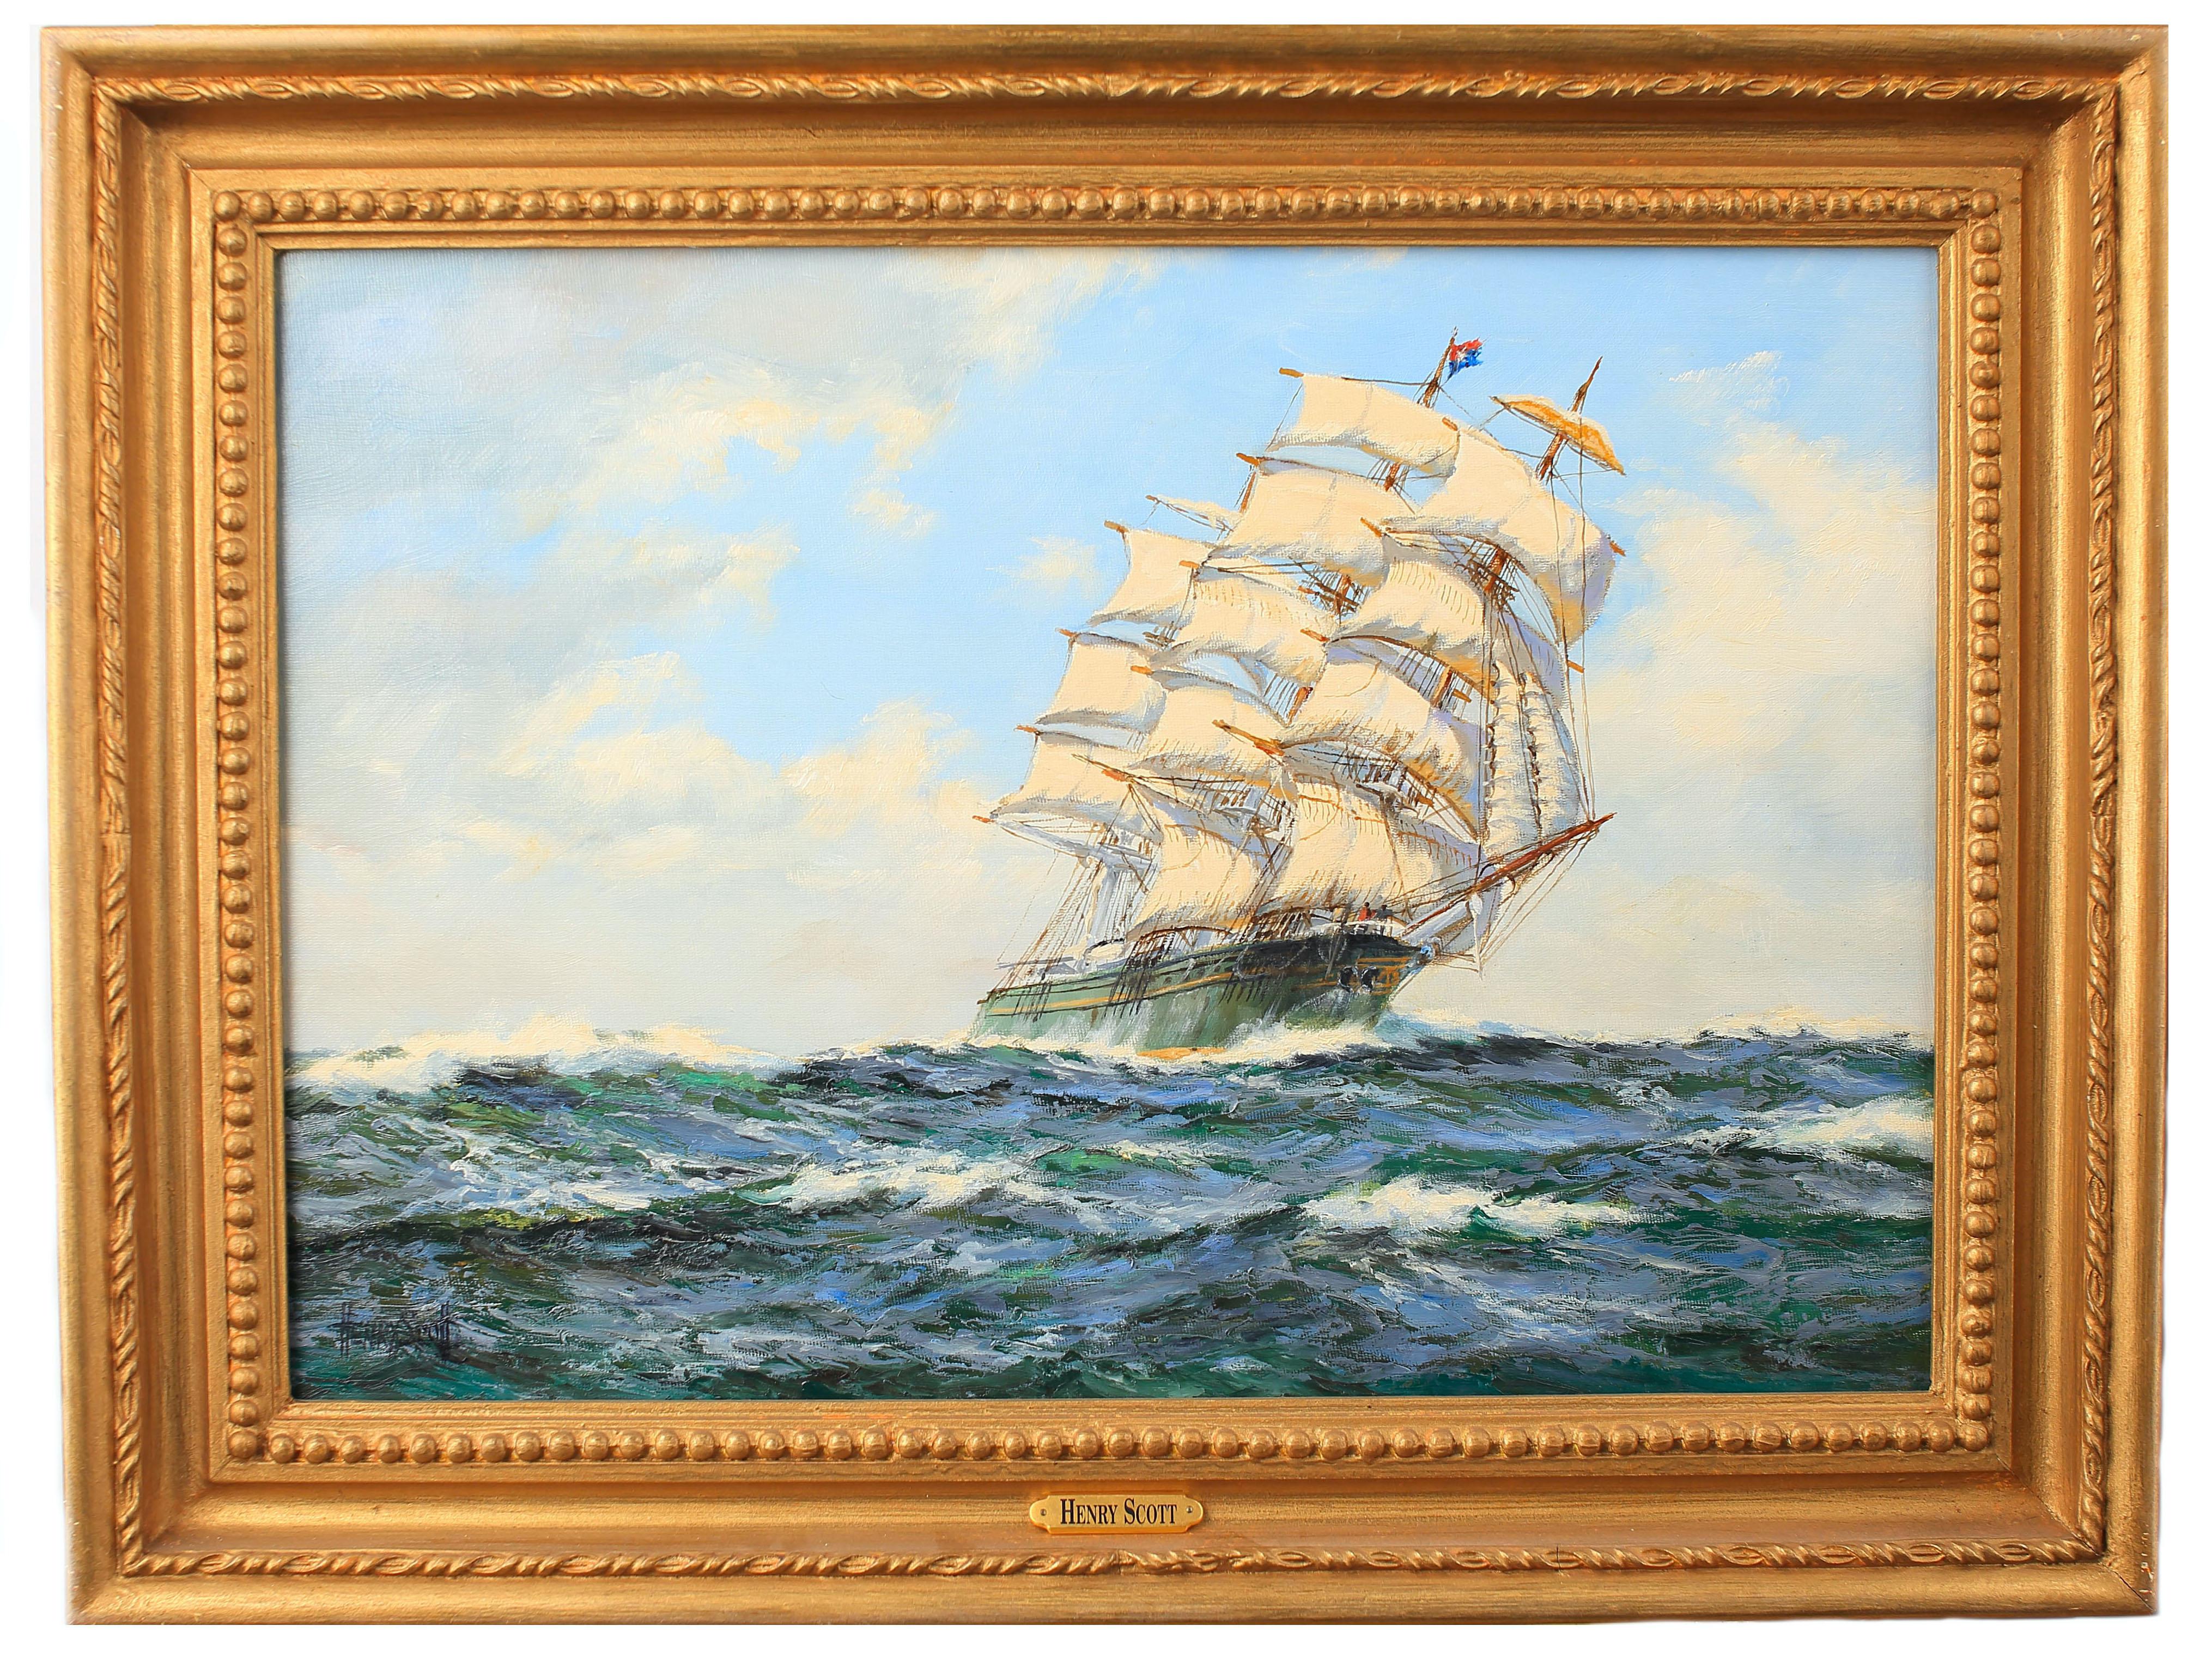 Foochow to London, Tea Clipper ‘Thermopylae
Dimensions: 
13 x 19.50 inches
Medium: 
Oil on panel
Signed
Provenance
McConnal Mason, London
Private Collection, USA
Alan Barnes Fine Art, Dallas TX

Henry Scott was a painter of marines and coastal